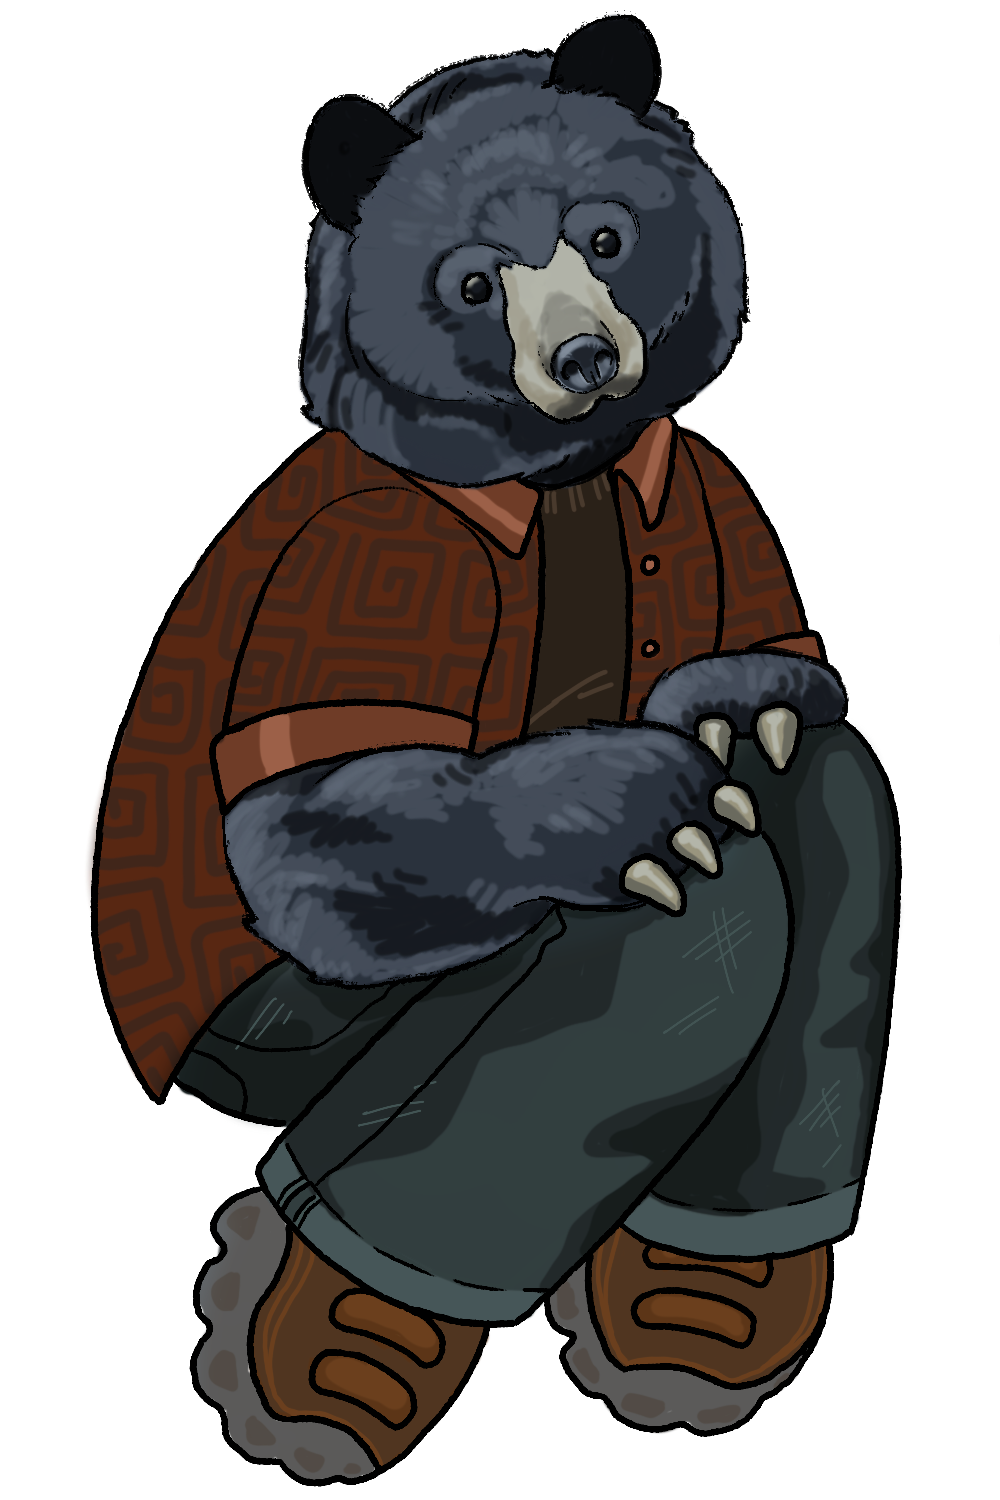 drawing of an anthropomorphic black bear wearing a patterned button up shirt, blue jeans, and red sneakers. It is sitting with its paws on its knees